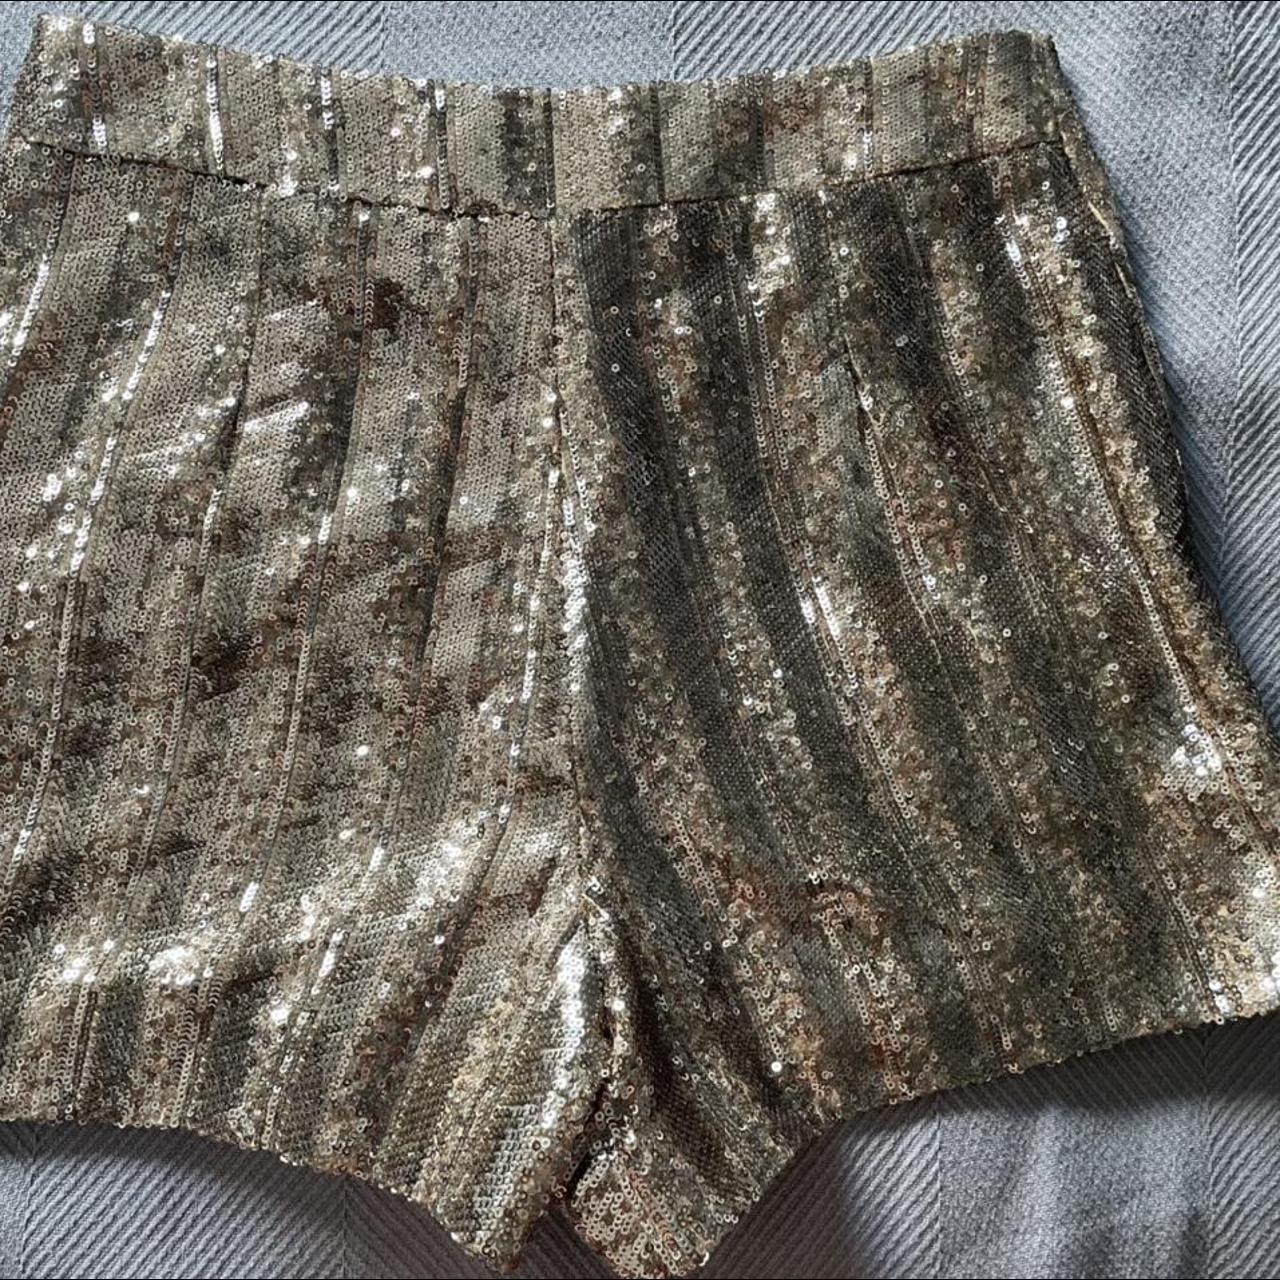 Sézane Rick shorts in gold sequin. Like new, worn once. - Depop